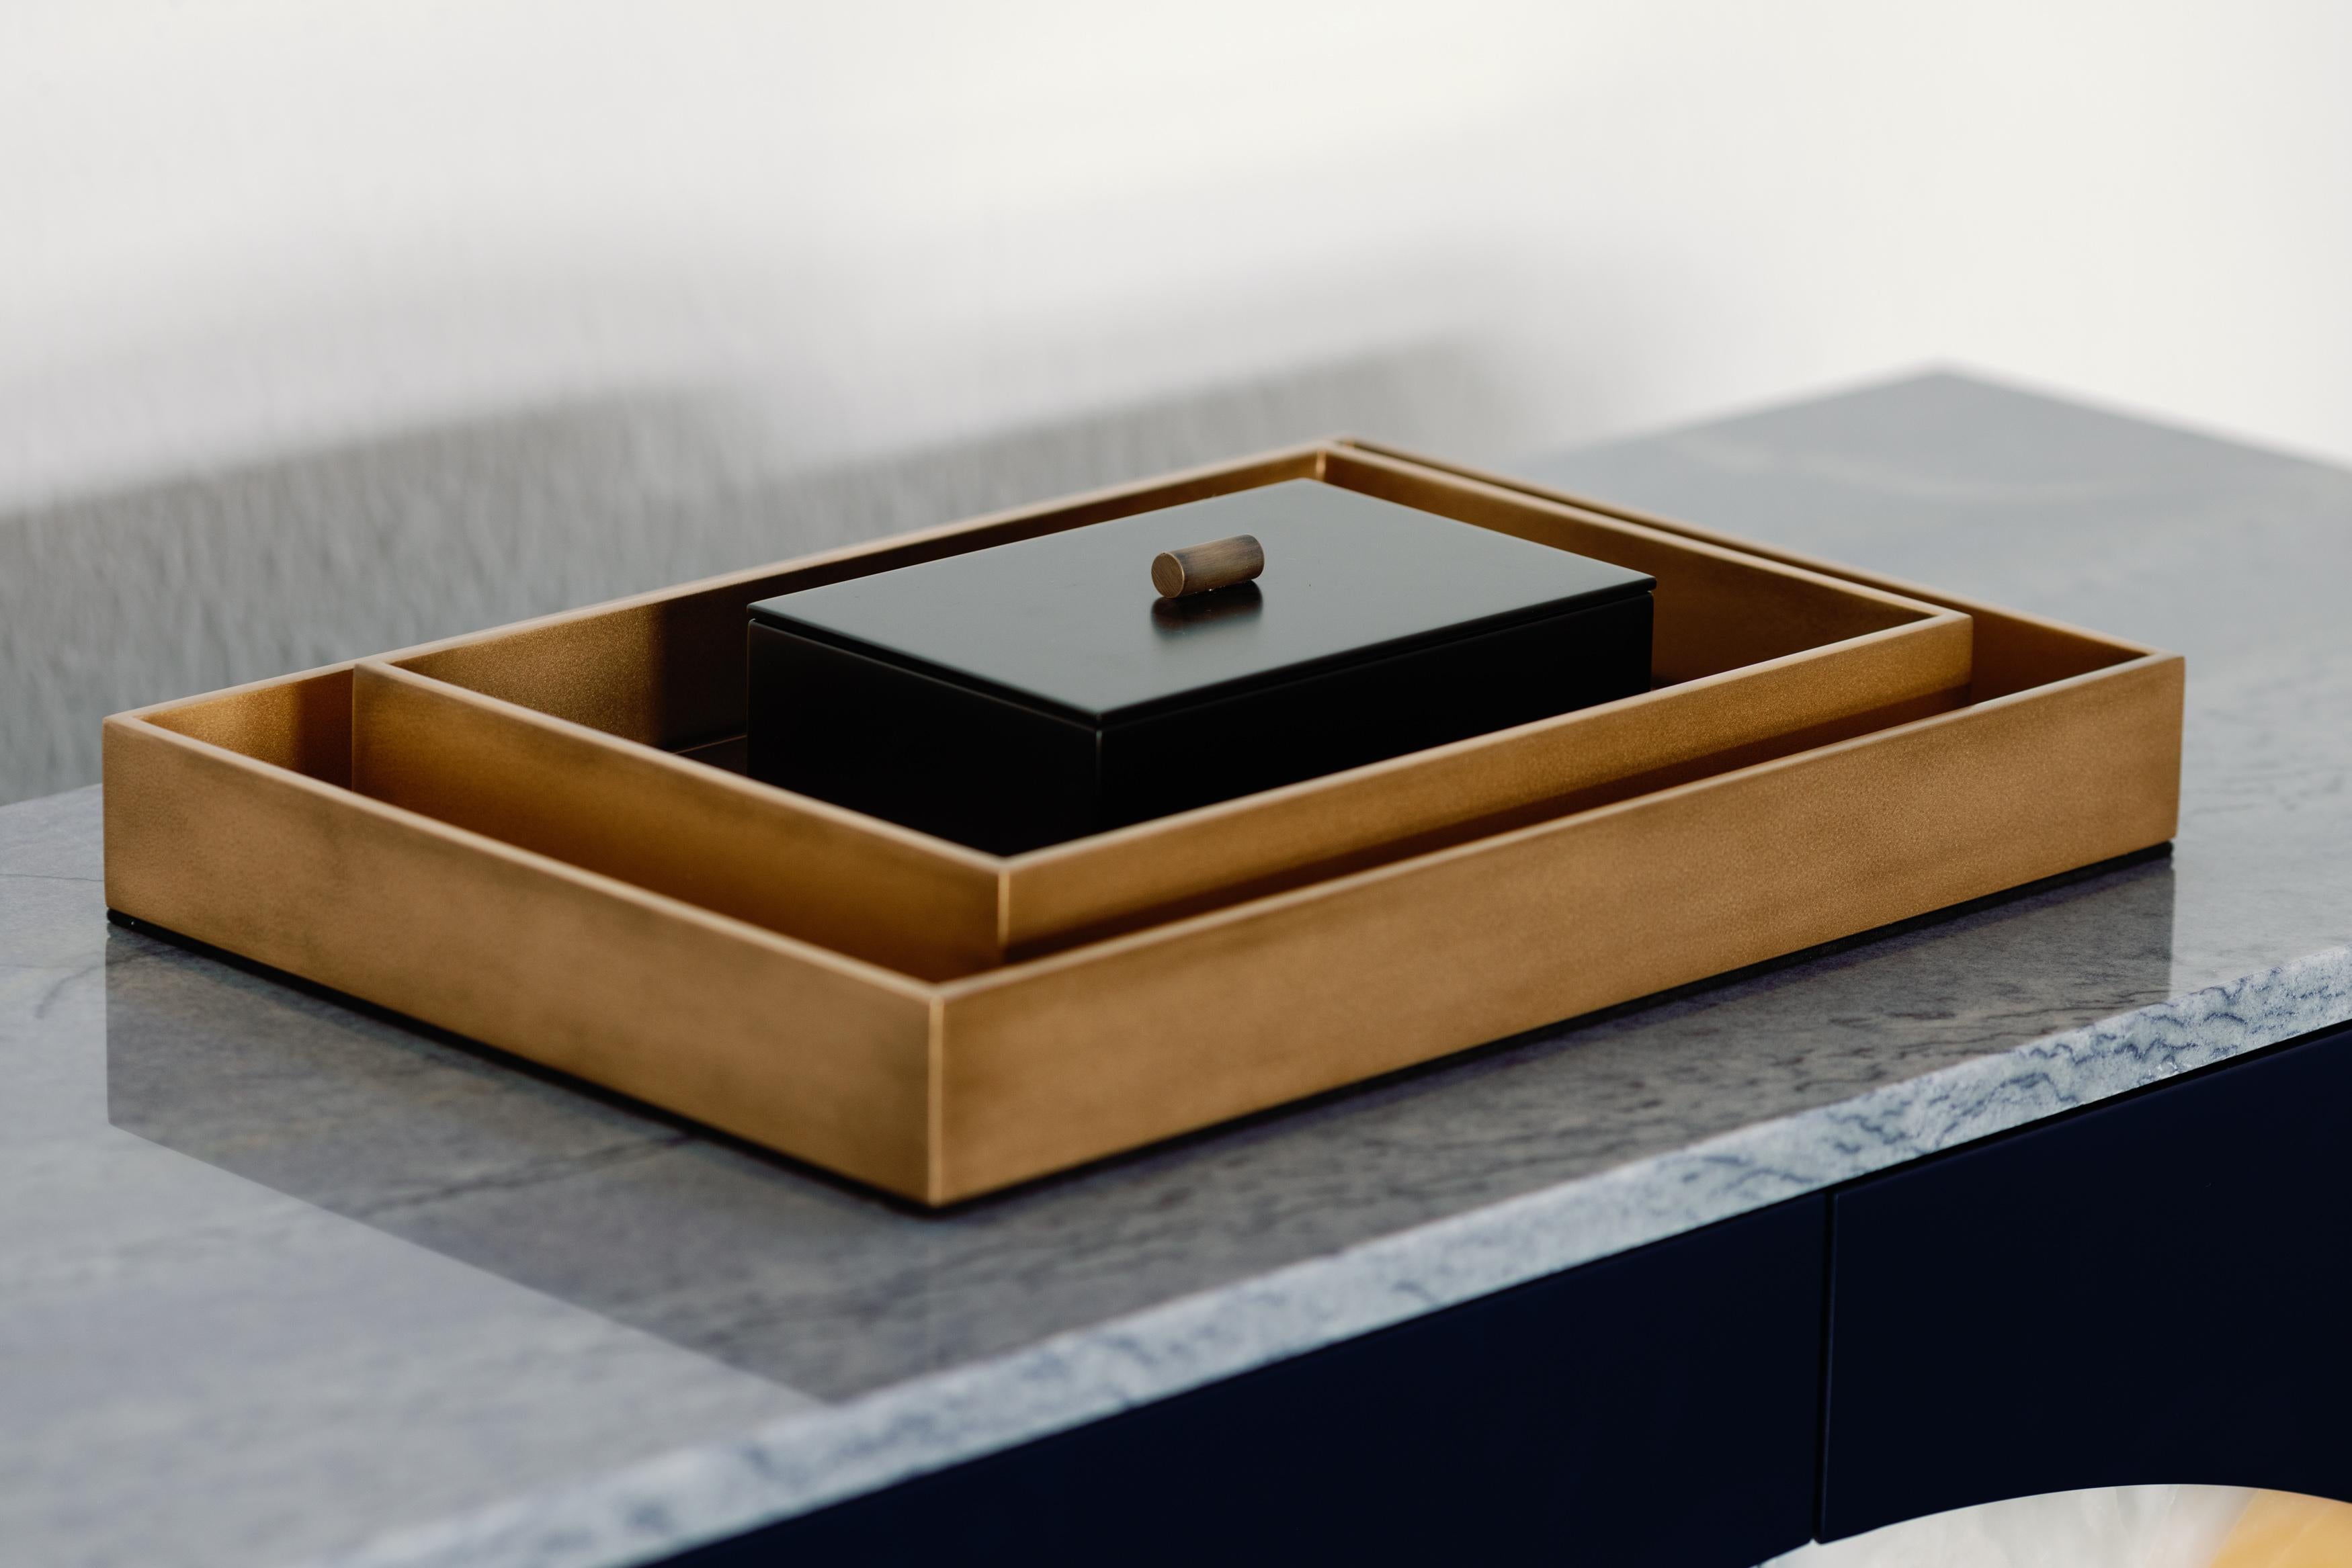 Set of 2 Piemonte trays and box aga, Lusitanus Home Collection, Handcrafted in Portugal - Europe by Lusitanus Home.

A sublime serving tray, Piemonte was design to uplift layback moments. A wooden serving tray lined in dark oxidized gold with bronze